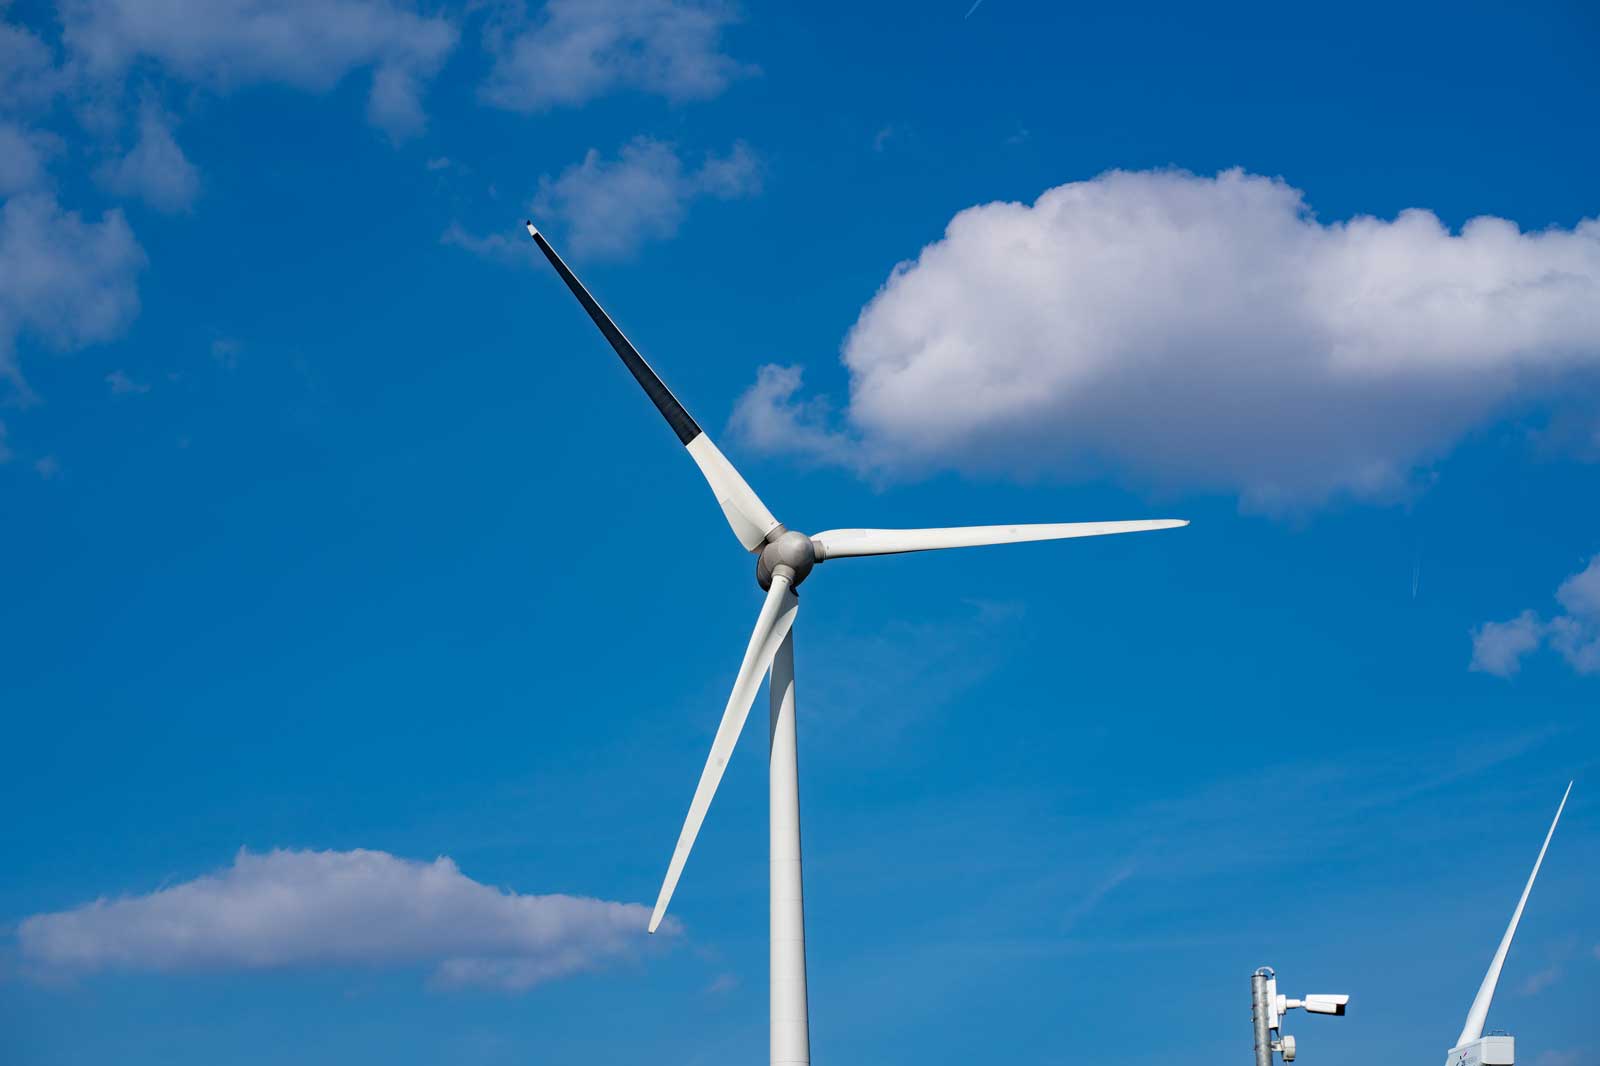 Black rotor blades for bird protection | RWE in the Benelux